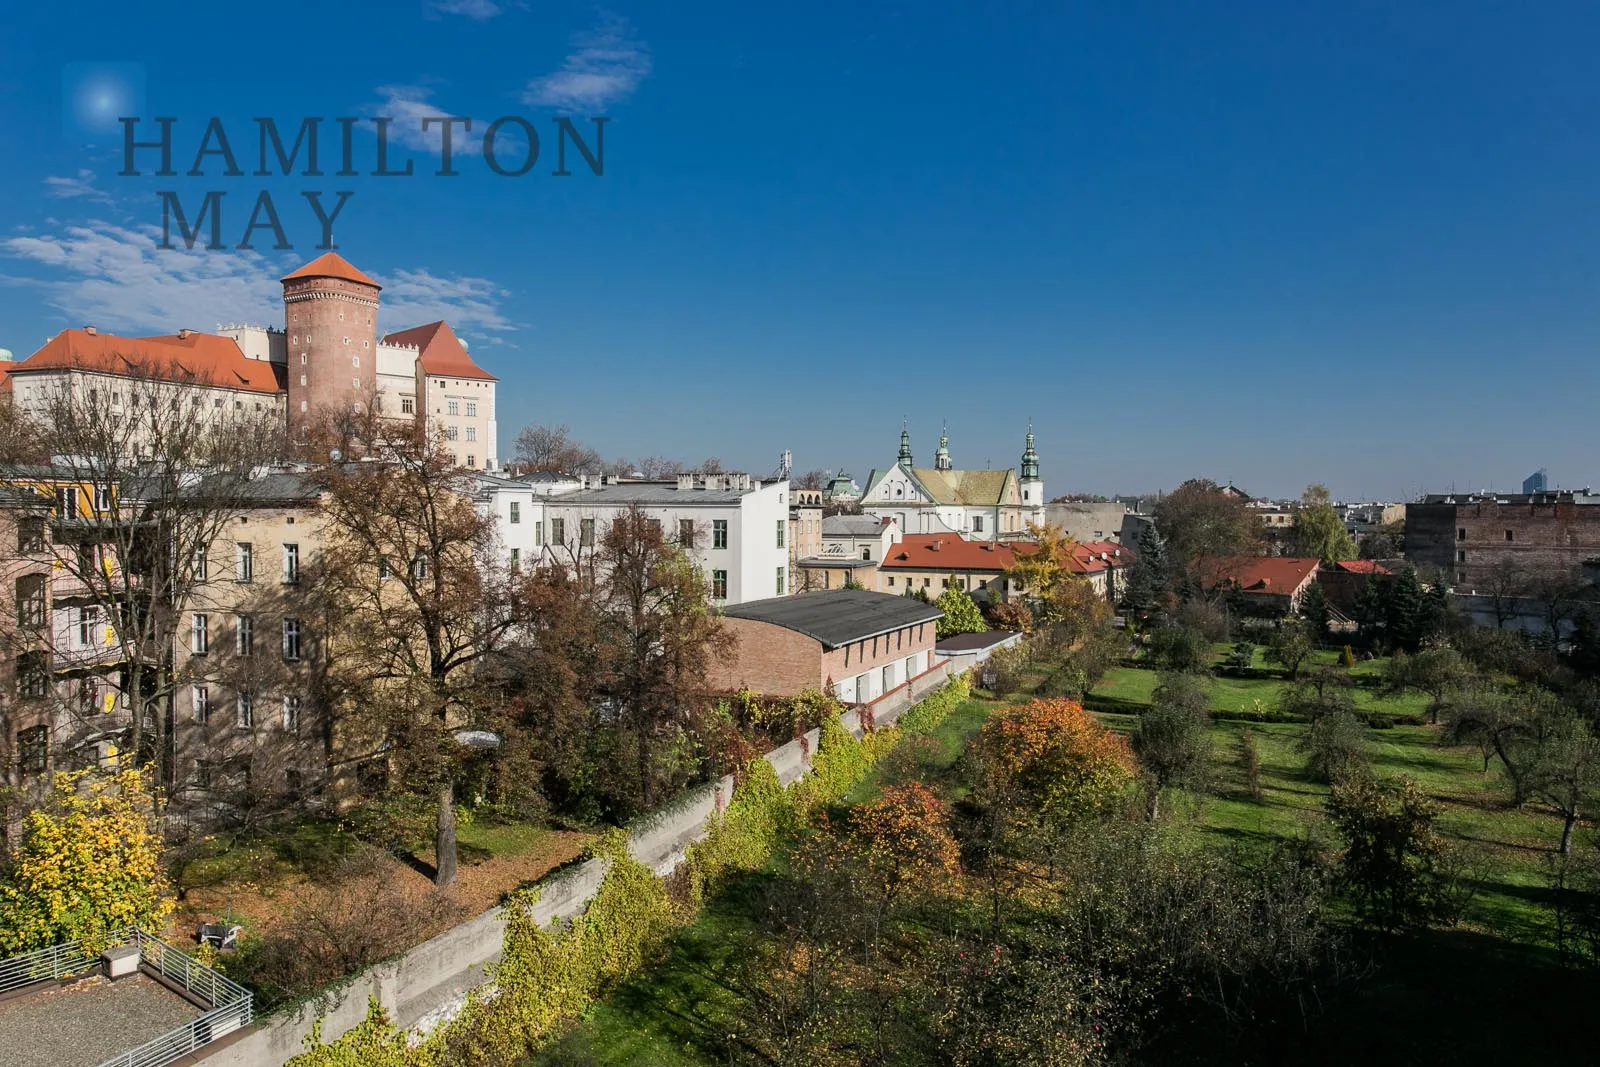 Beautilful 2 bedroom apartment with rivier view, located right by the Wawel Castle - ul. Smocza - slider